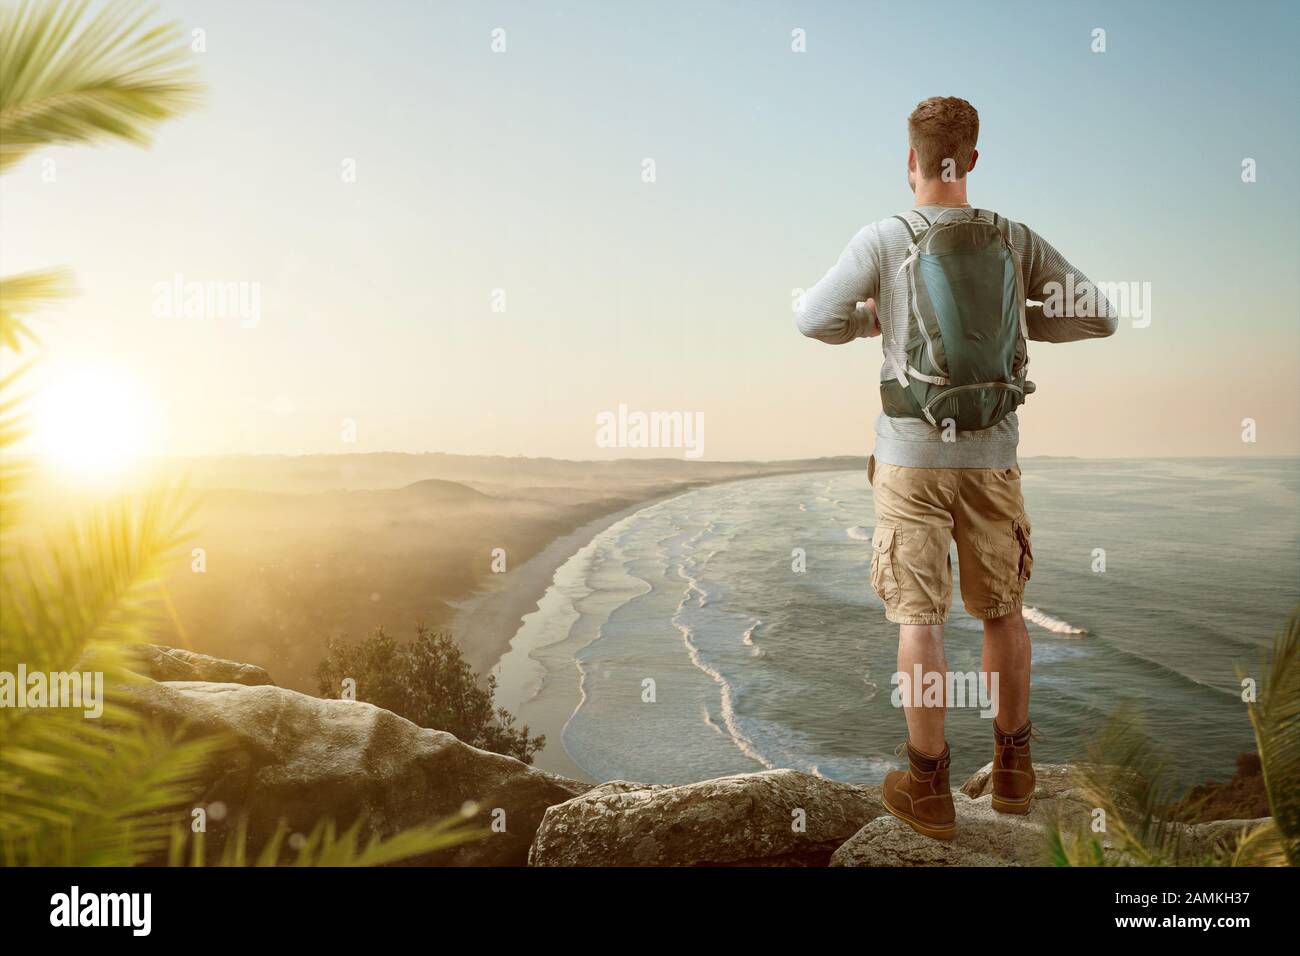 Hiker with a scenic view over a coastline Stock Photo